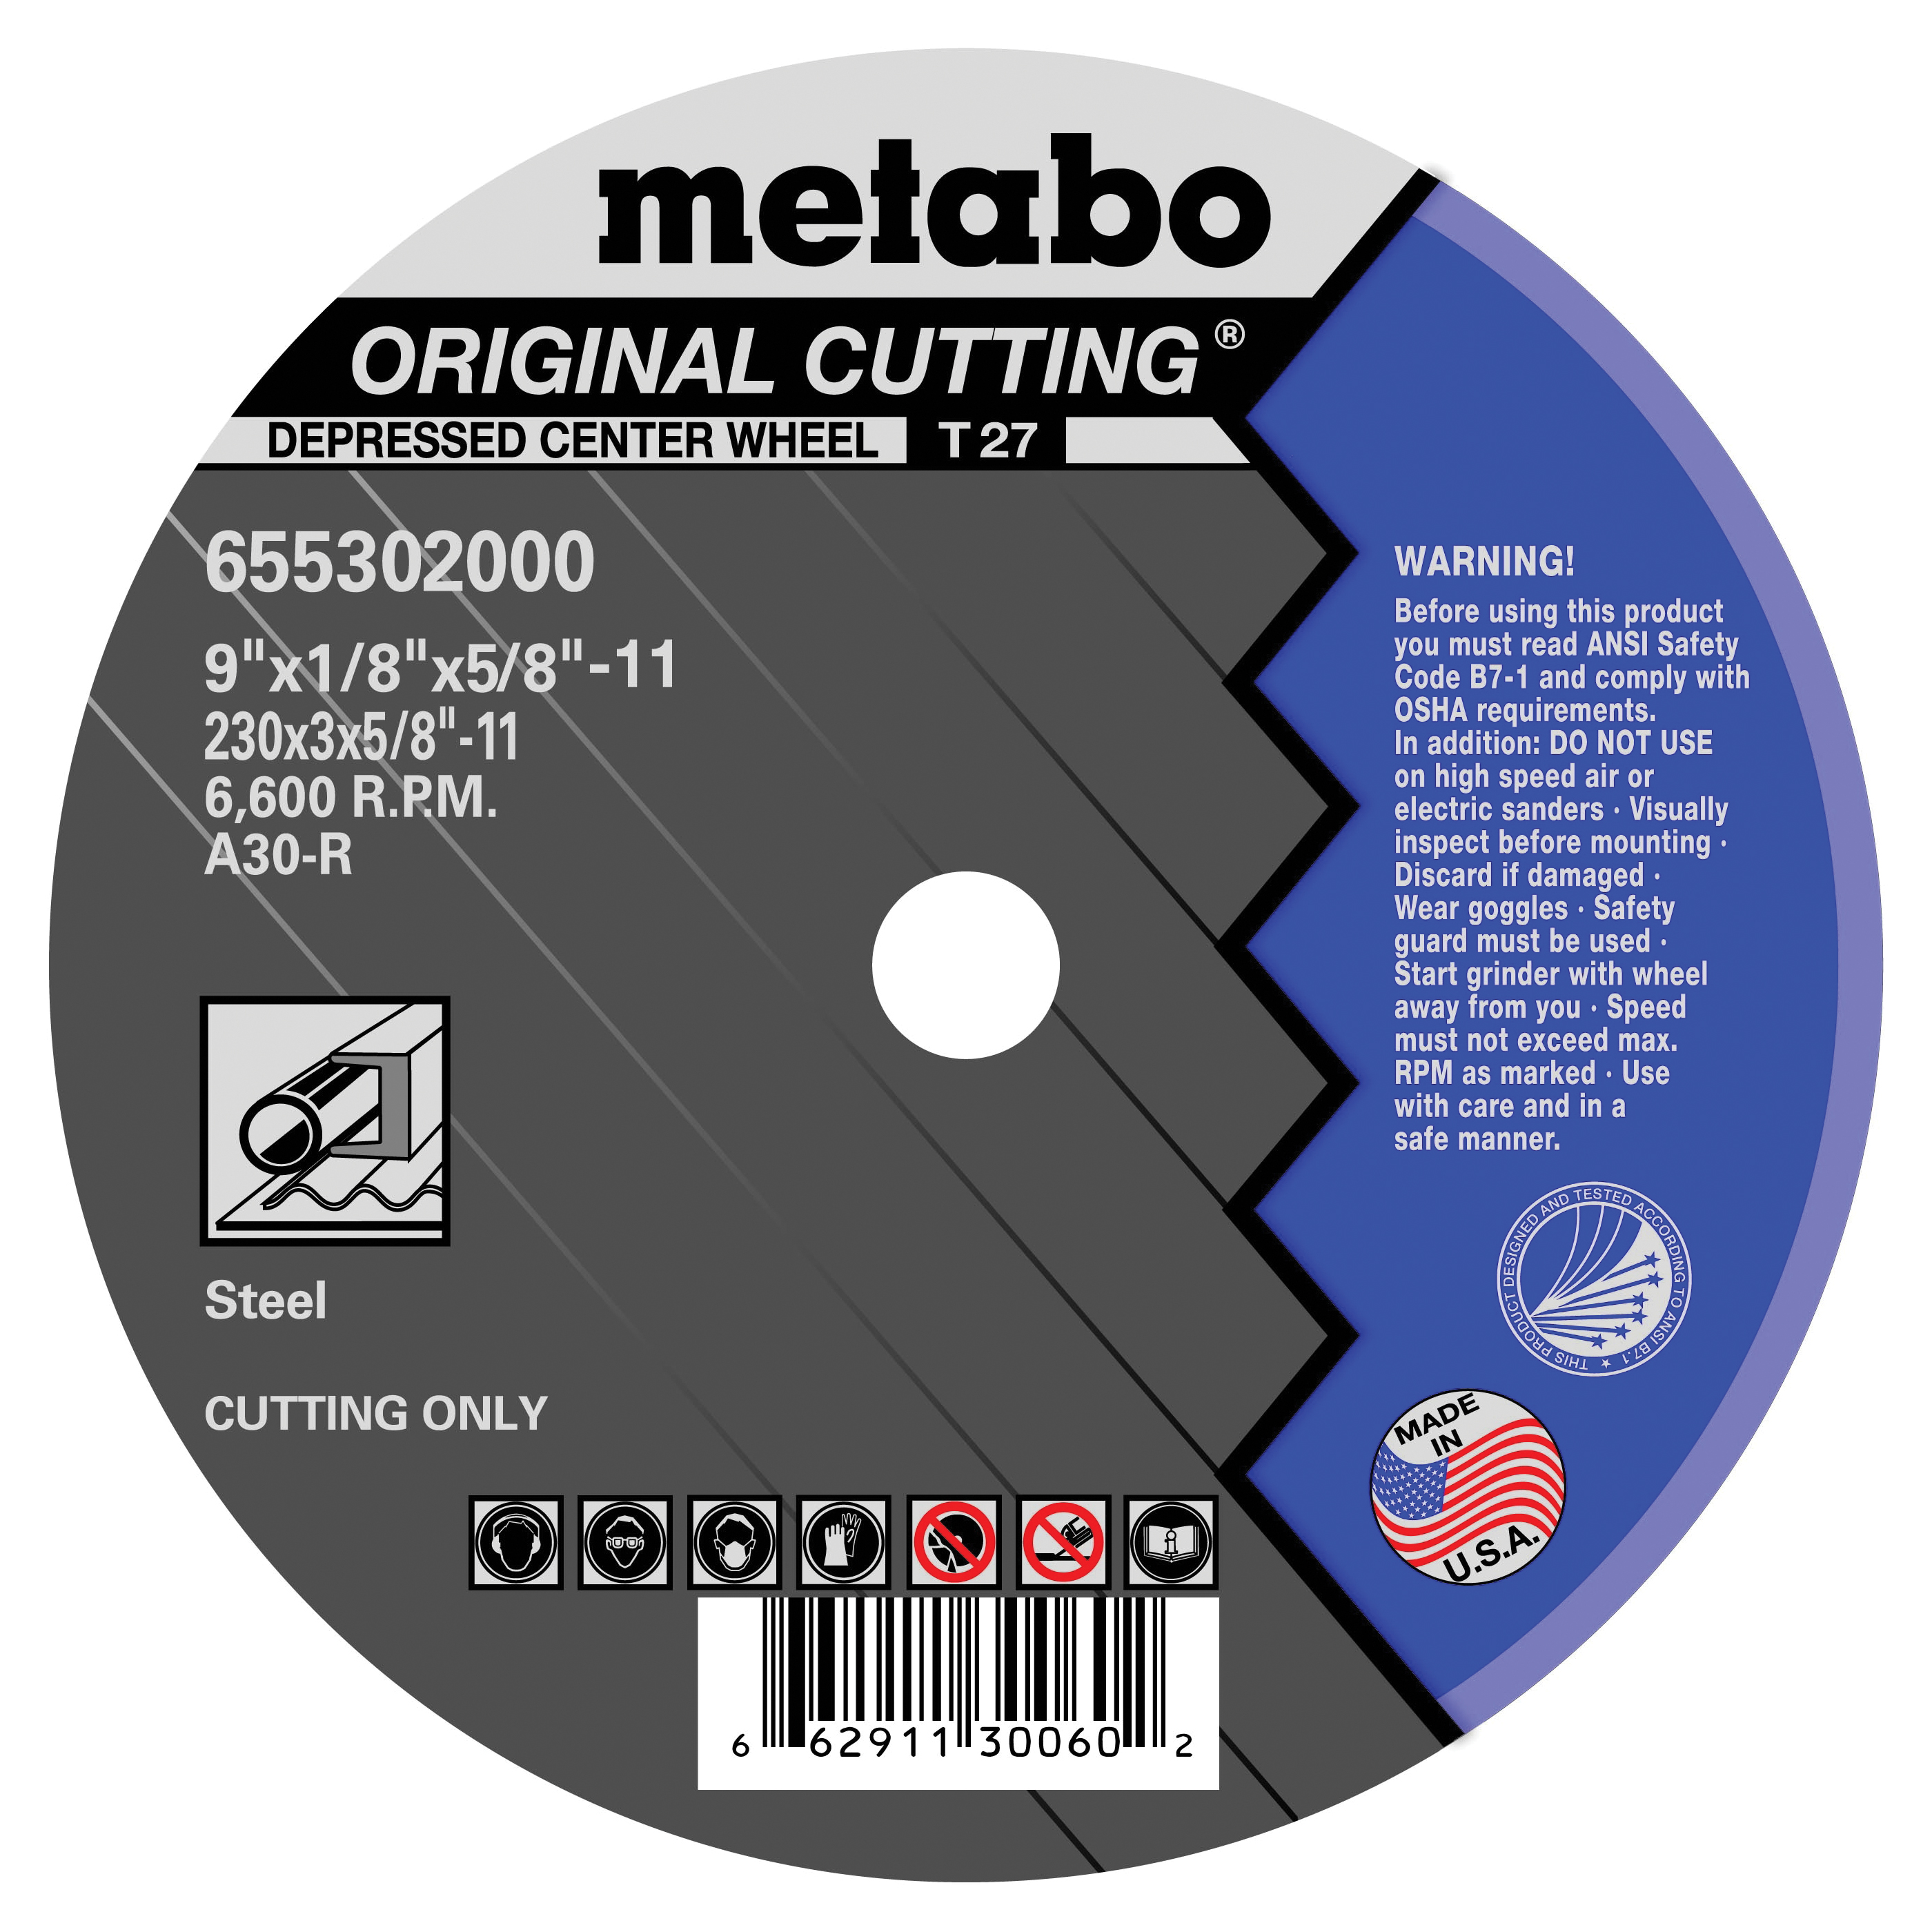 metabo® 655997000 Slicer Plus Long Life Straight Cut-Off Wheel, 4-1/2 in Dia x 0.045 in THK, 7/8 in Center Hole, 60 Grit, Aluminum Oxide Abrasive